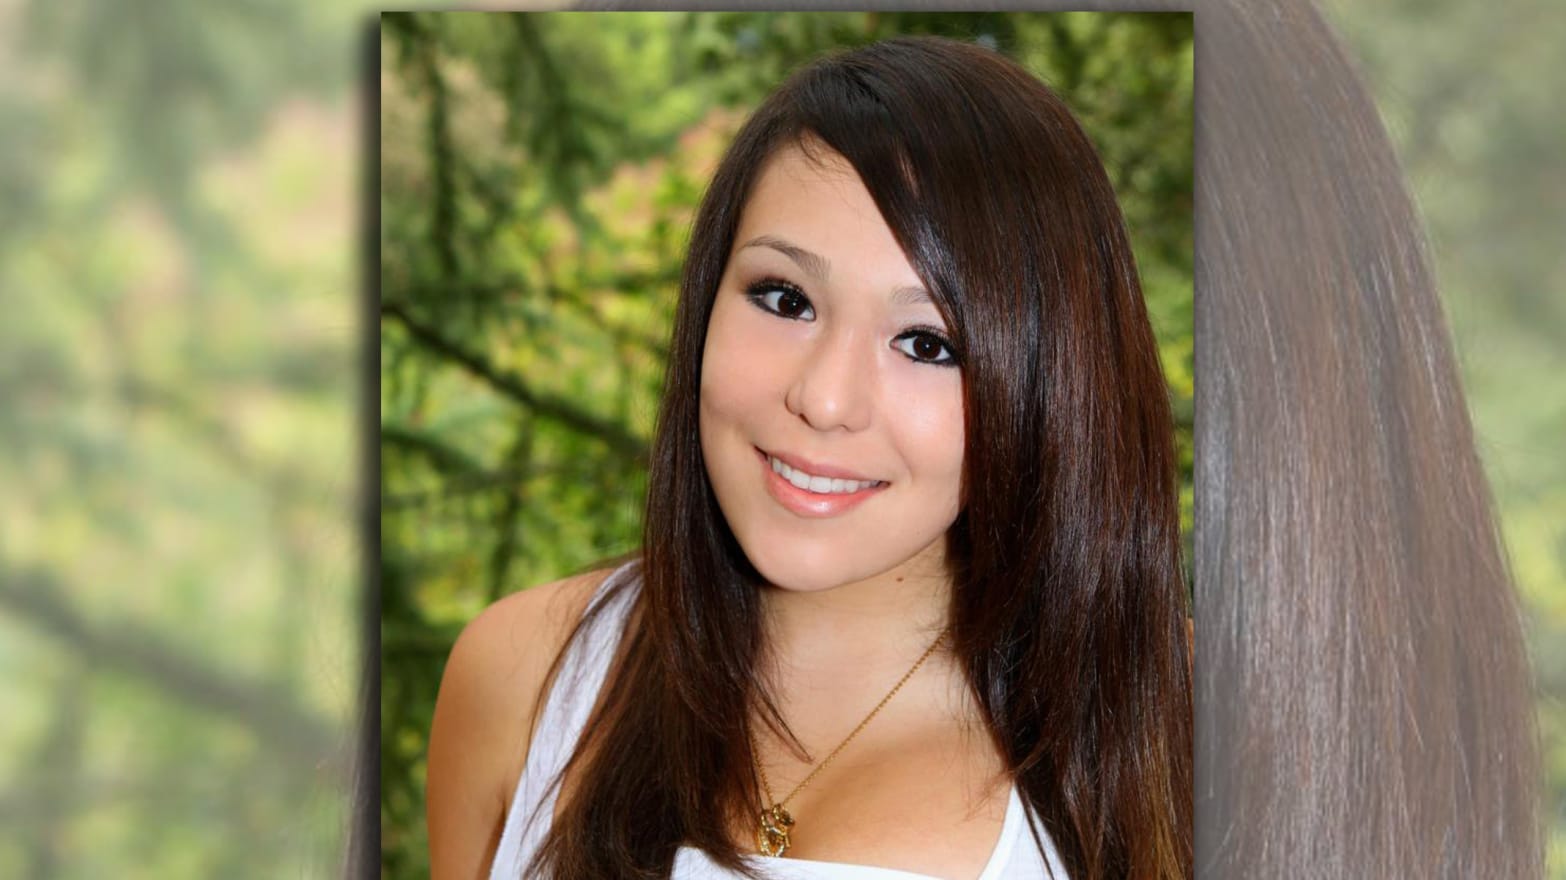 Audrie Pott Suicide: Dead After Inauguration Day